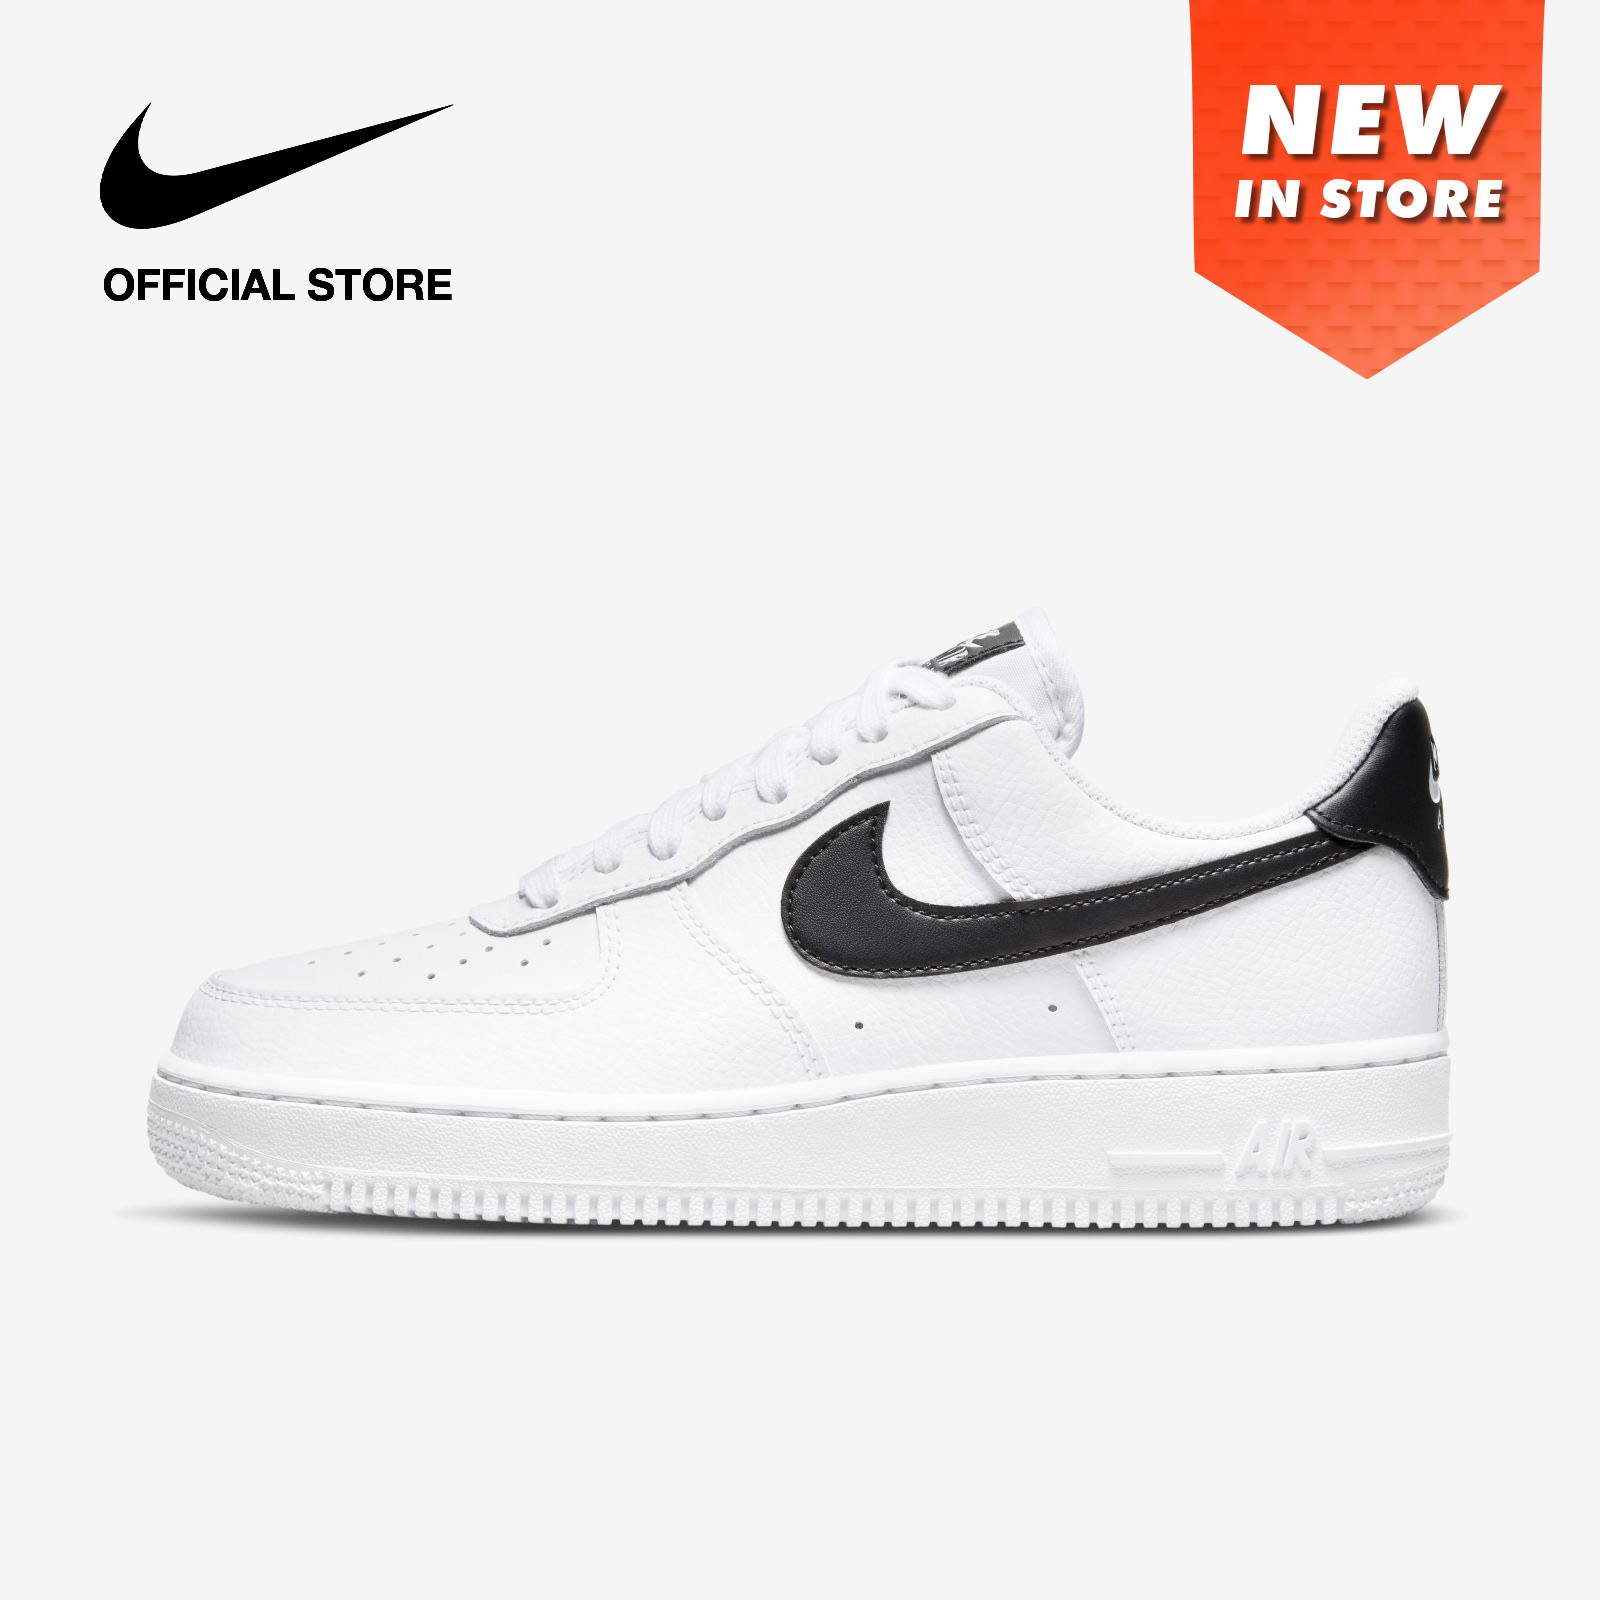 Nike Women's Air Force 1 '07 Shoes - White